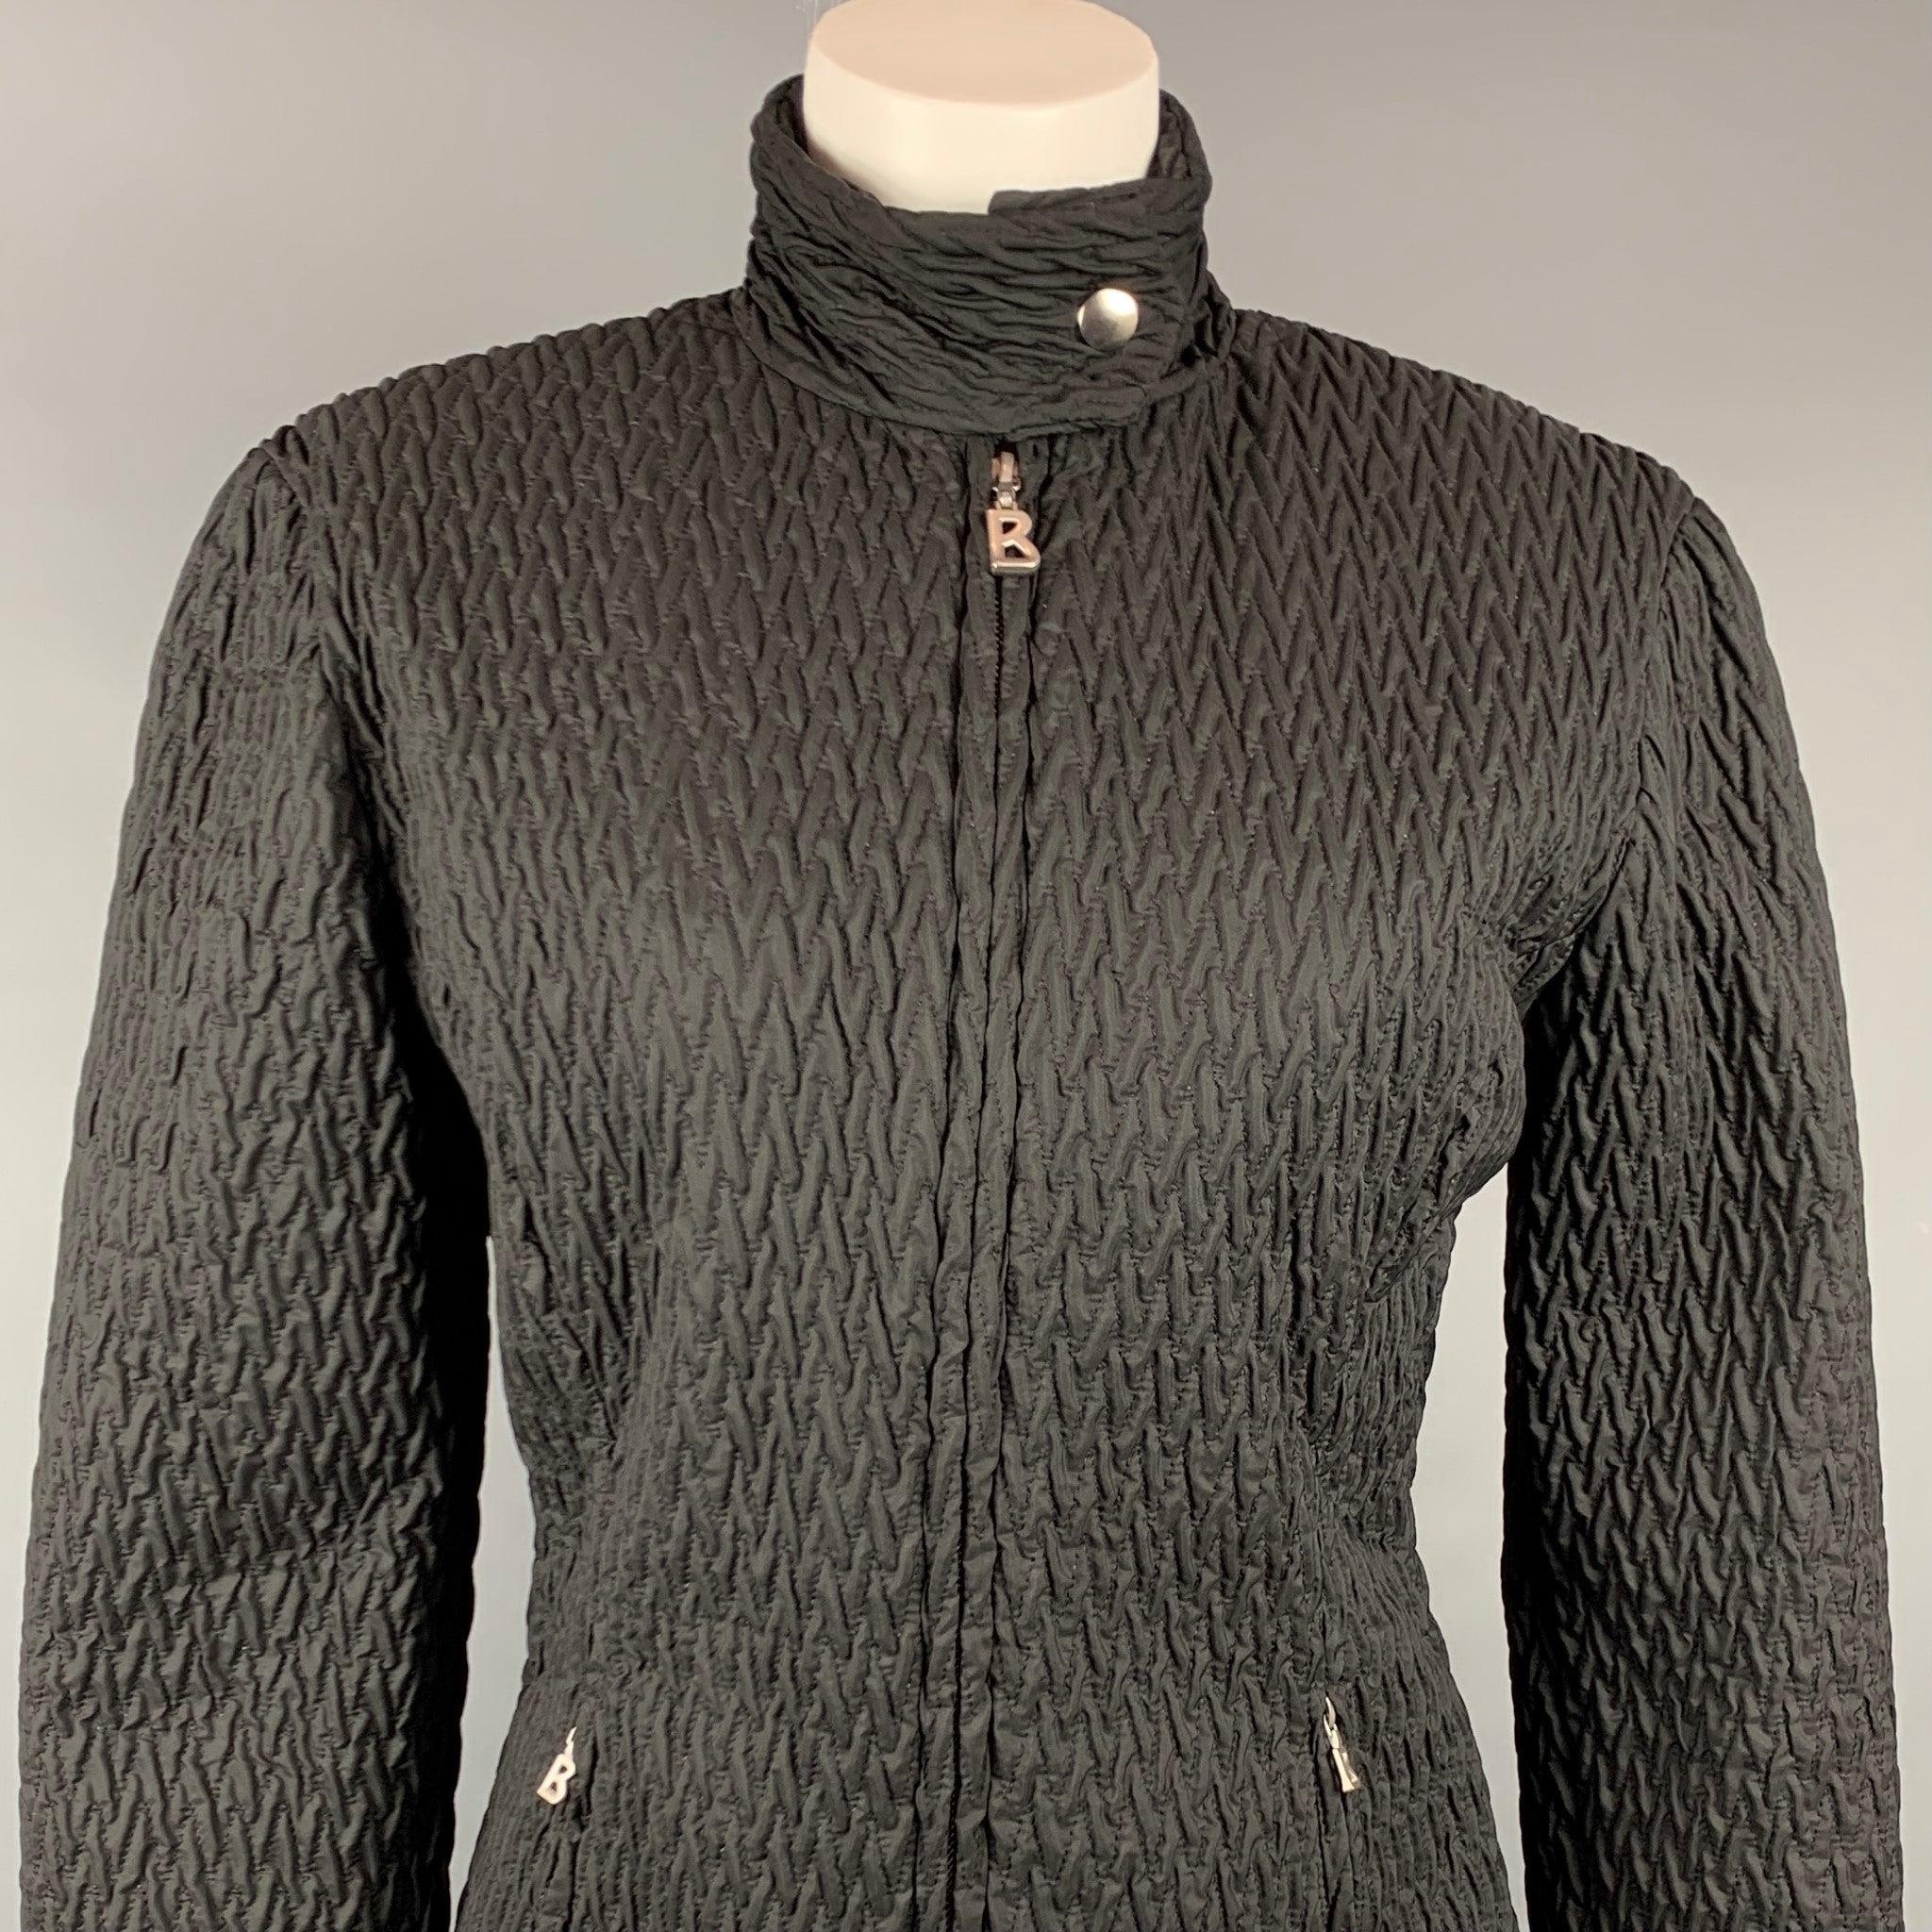 BOGNER jacket comes in a black textured quilted nylon featuring a buttoned collar, silver tone hardware, and a full zip closure. Made in USA.Very Good
Pre-Owned Condition. 

Marked:   6 

Measurements: 
 
Shoulder: 18 inches  Bust: 38 inches 